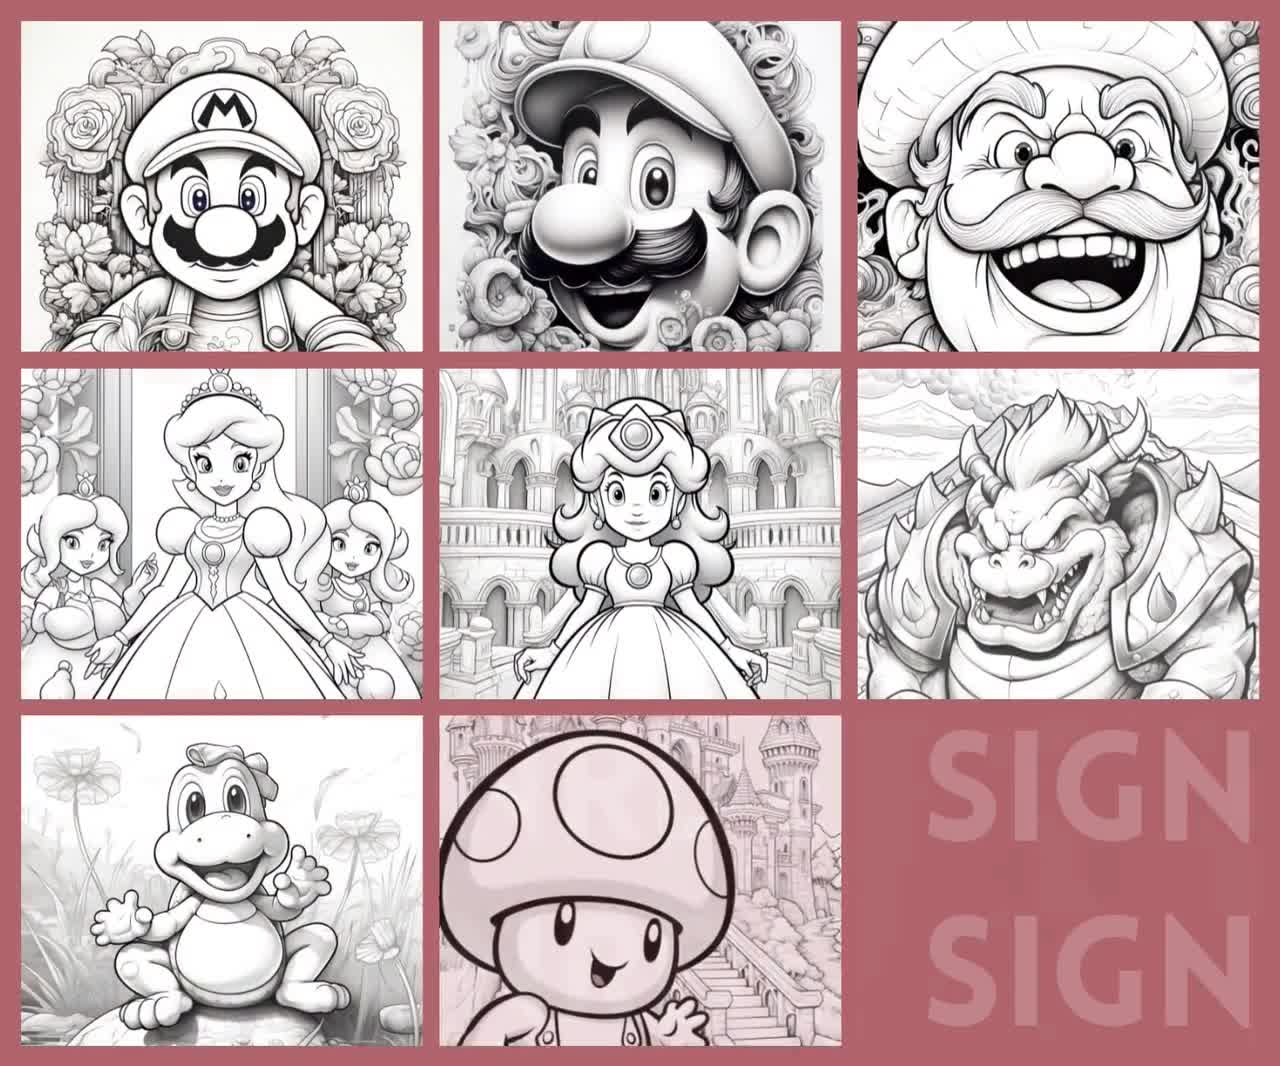 Realistic super mario characters coloring pages mario and friends super mario digital coloring book fun at home activity relax and color instant download